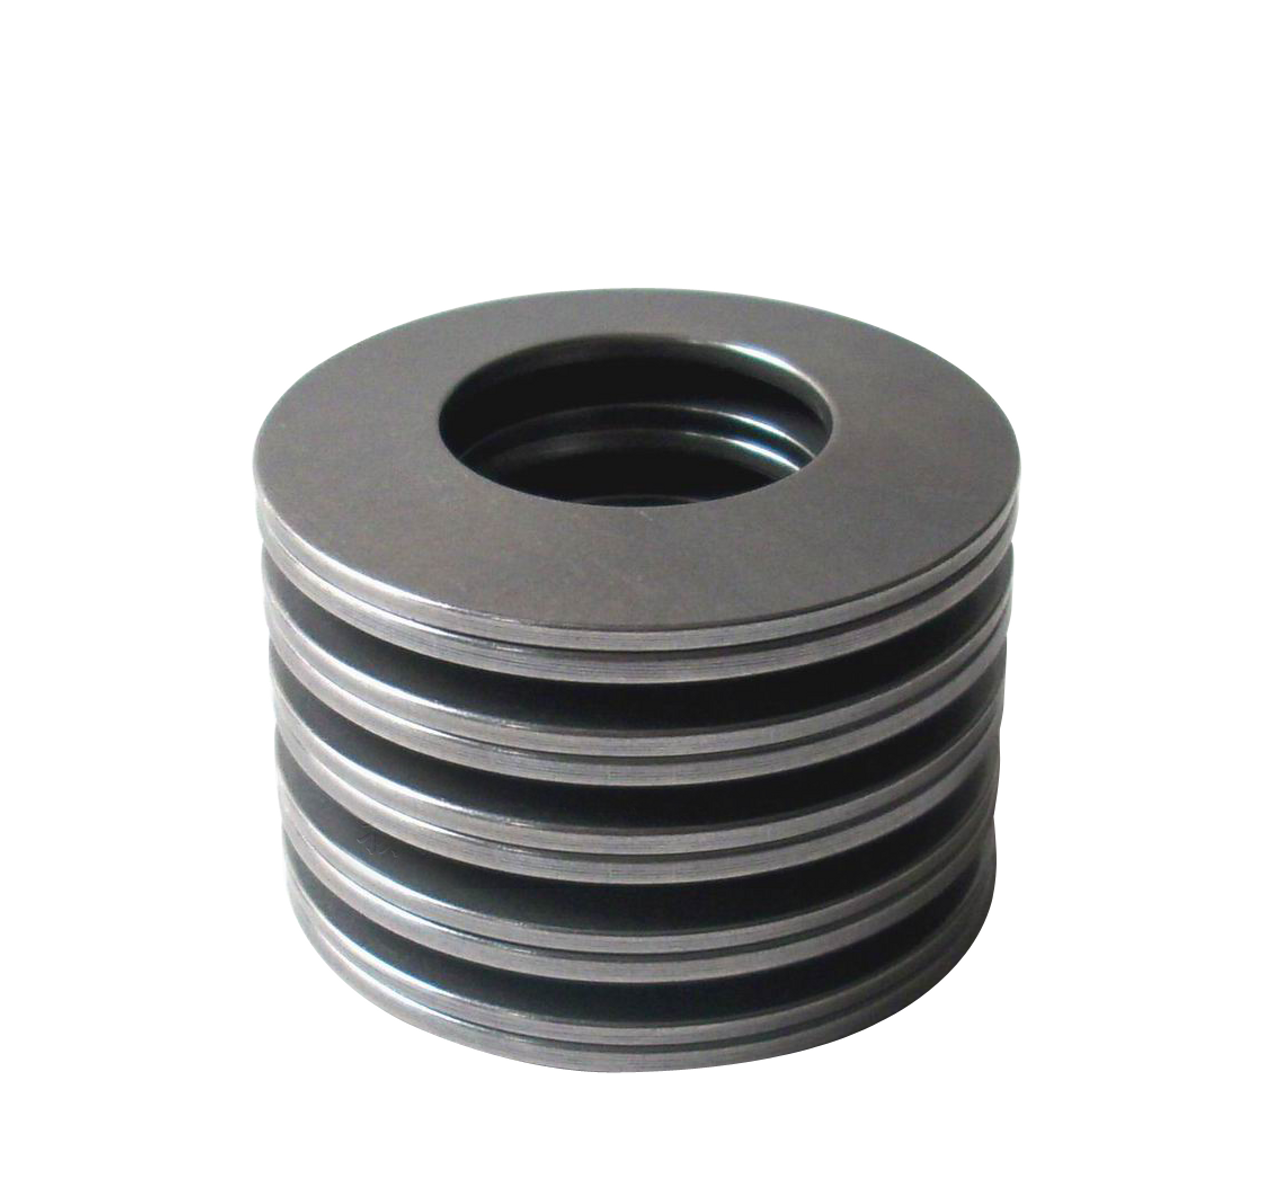 60mm Disc Spring (DIN 2093) Conical Washer  DS061.0-125-07